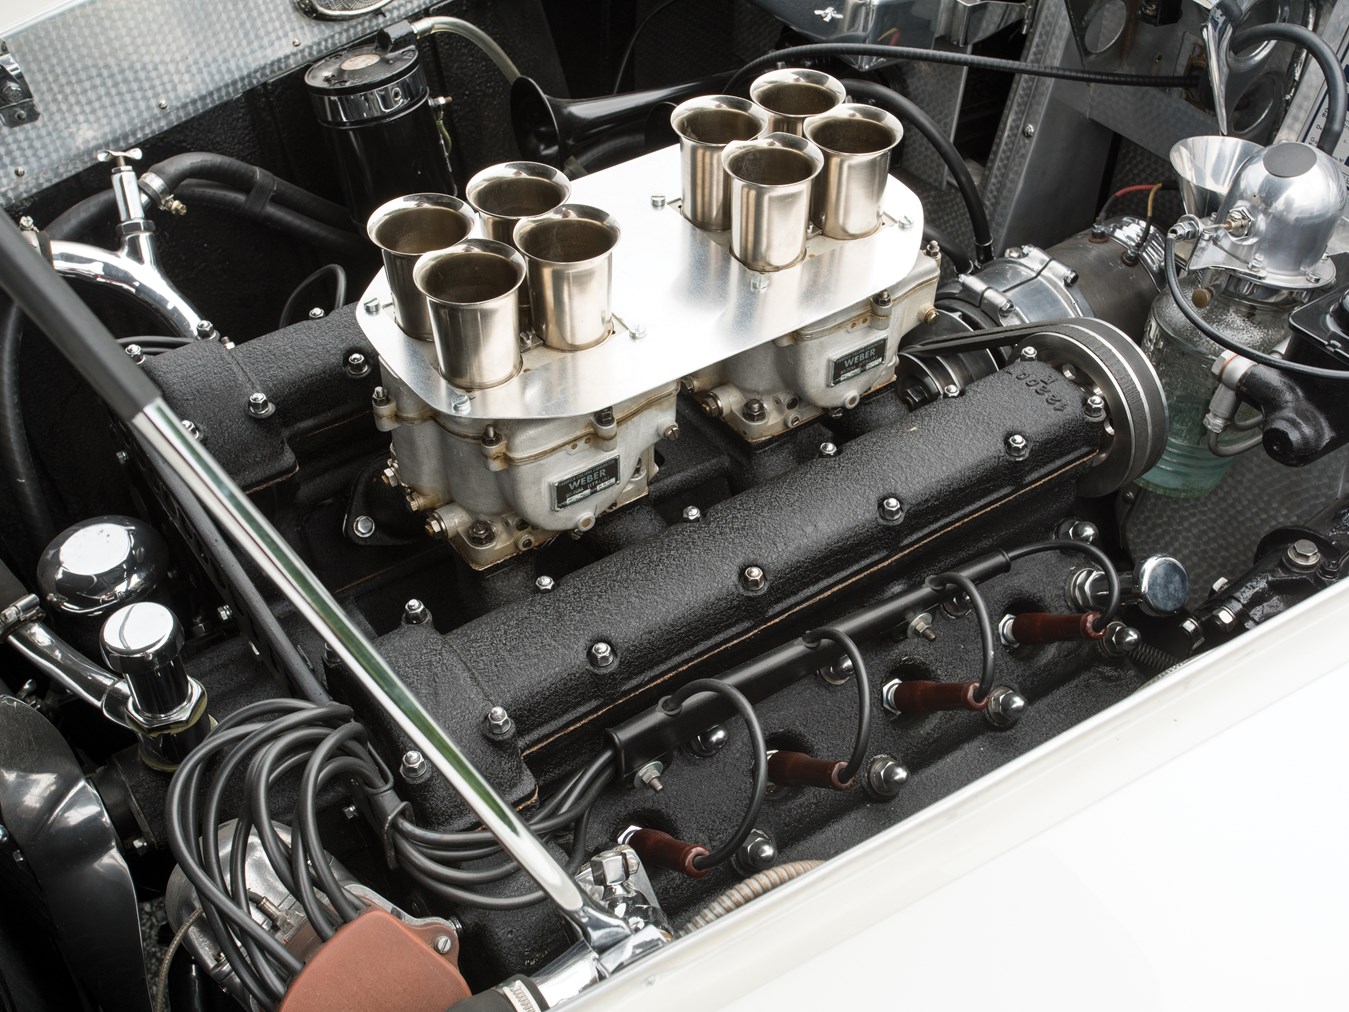 At the heart of any sports car needs to be an engine that captures the imagination. The Pegaso has a 2.8 liter Quad Overhead Cam V8 breathing through two four barrel Webber carburettors.